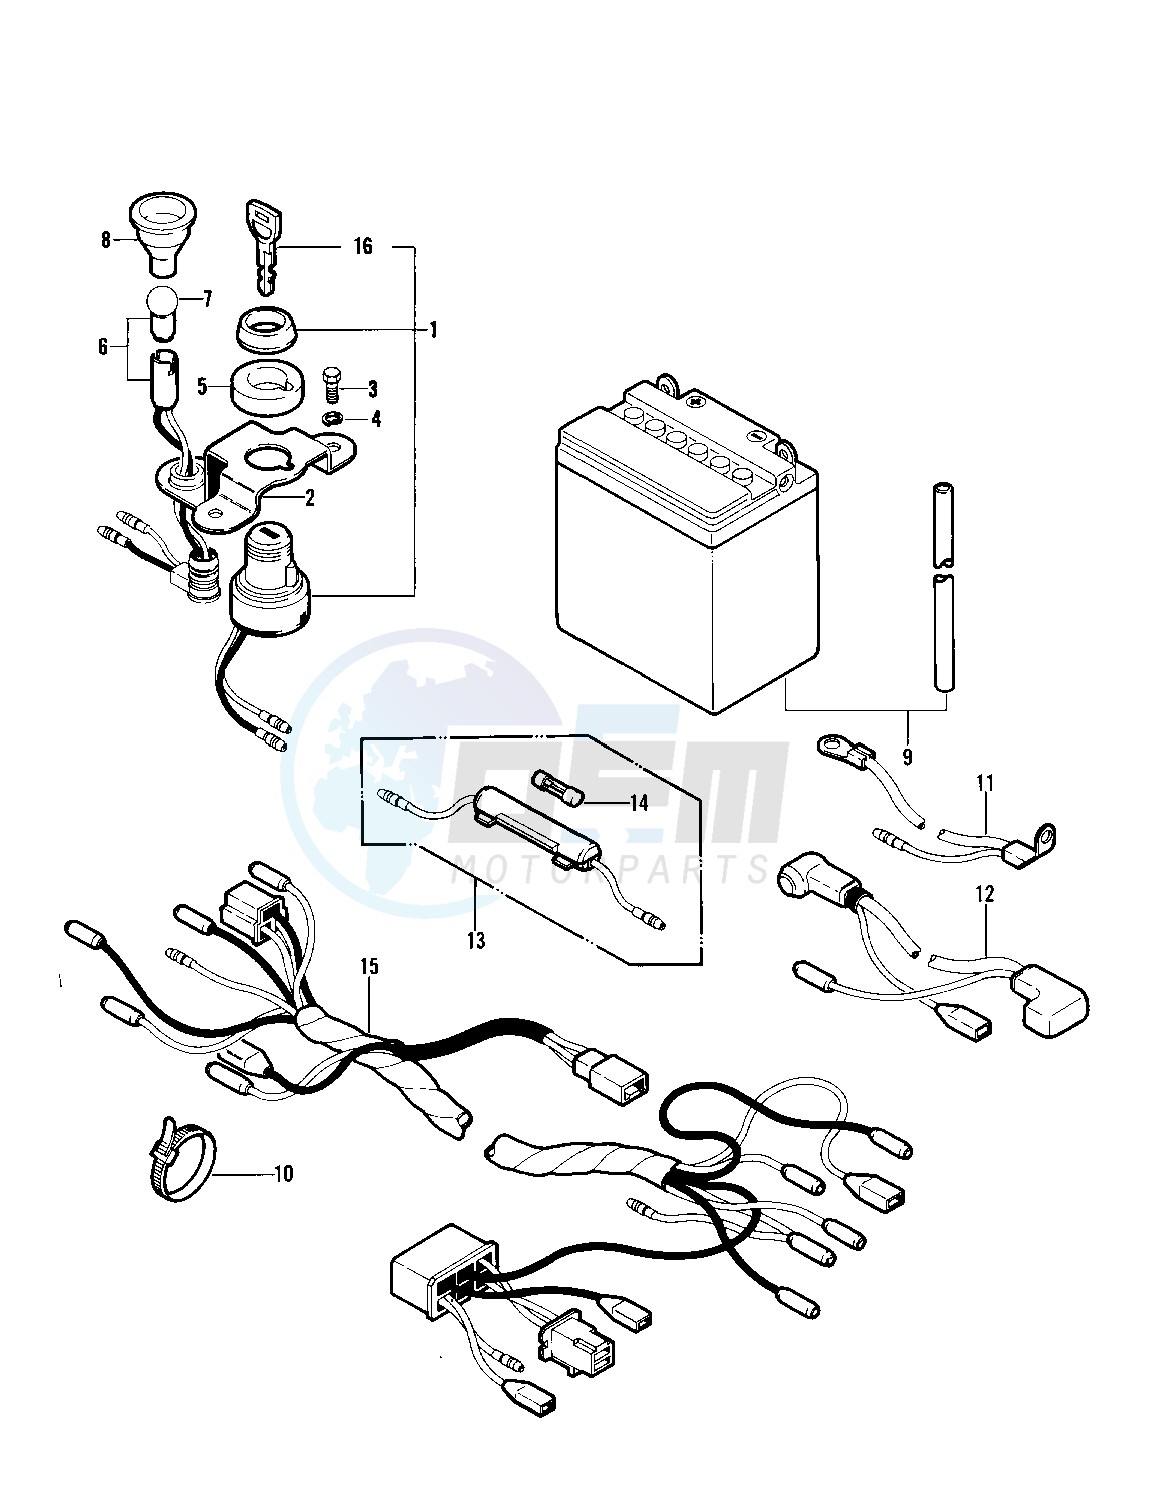 CHASSIS ELECTRICAL EQUIPMENT -- 82 A1- - blueprint